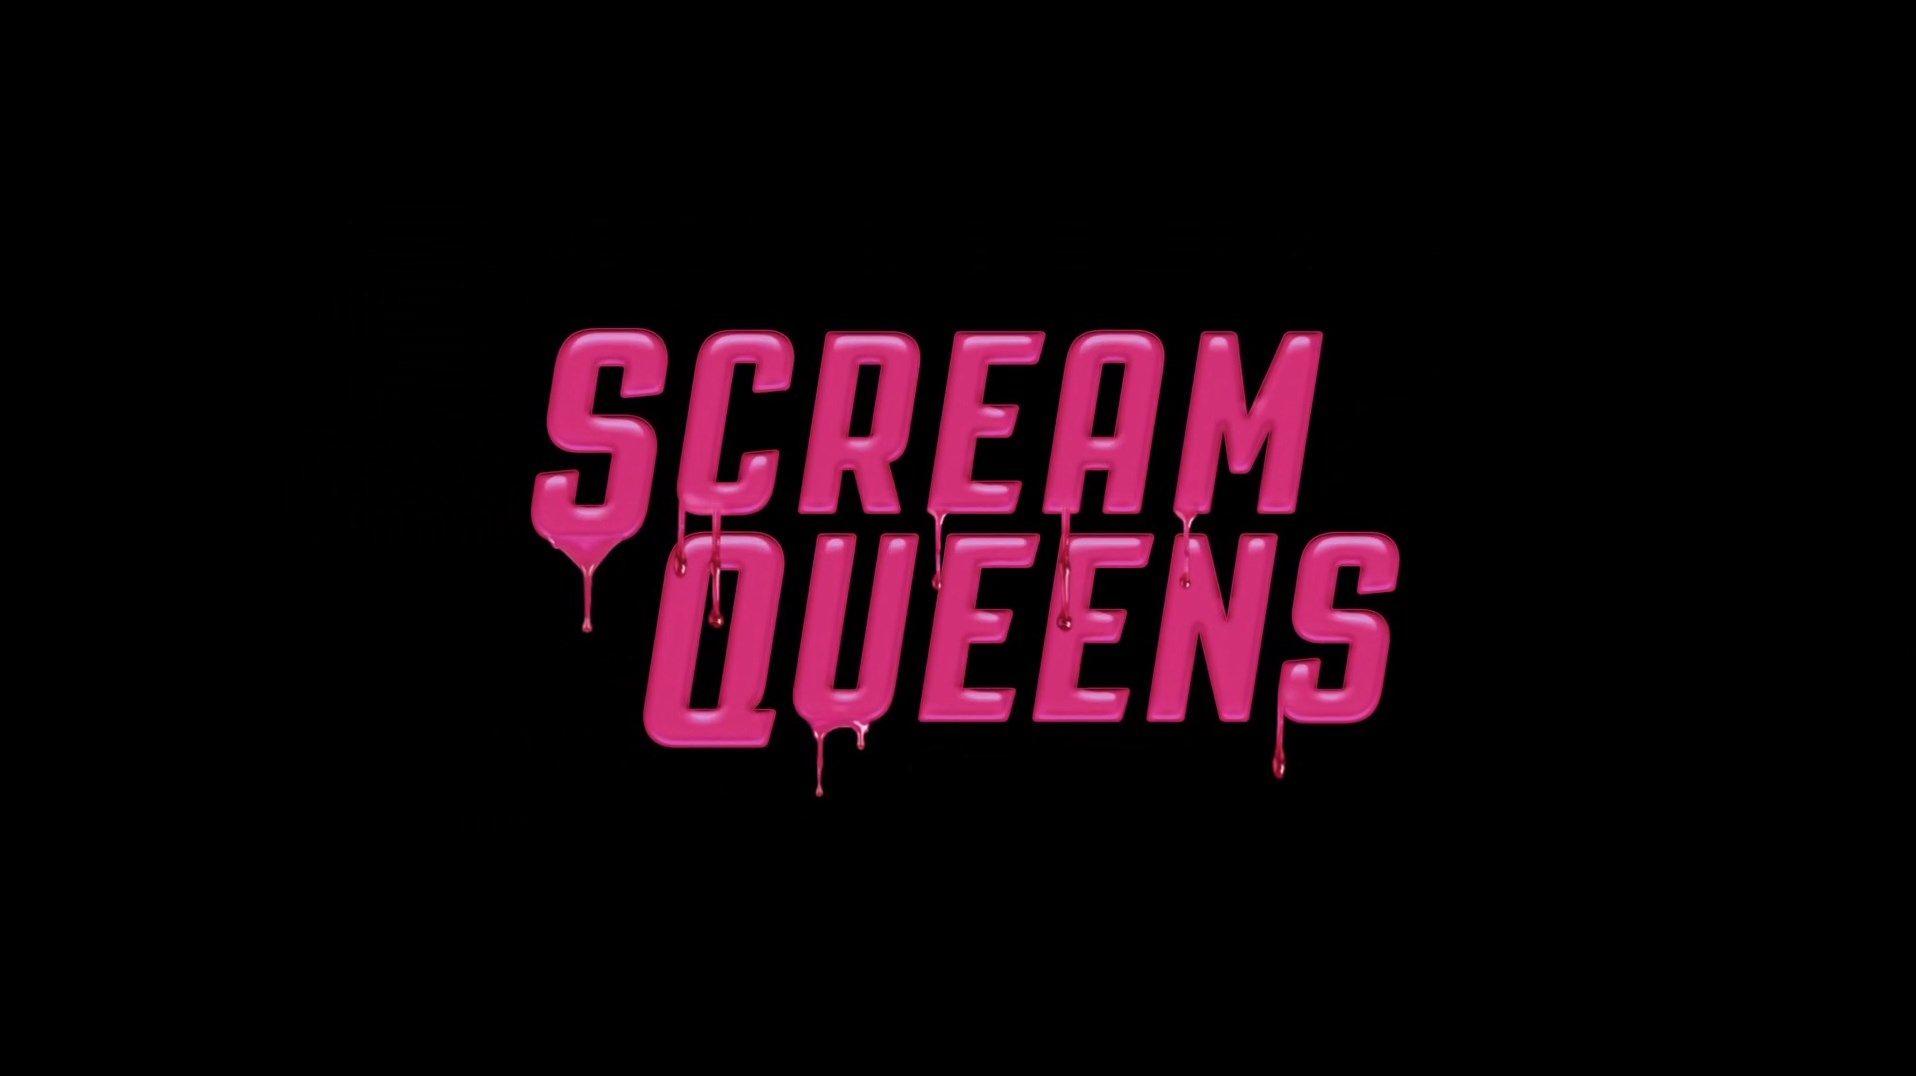 Scream Queens”.62M & 2.48M for the 2 final episodes